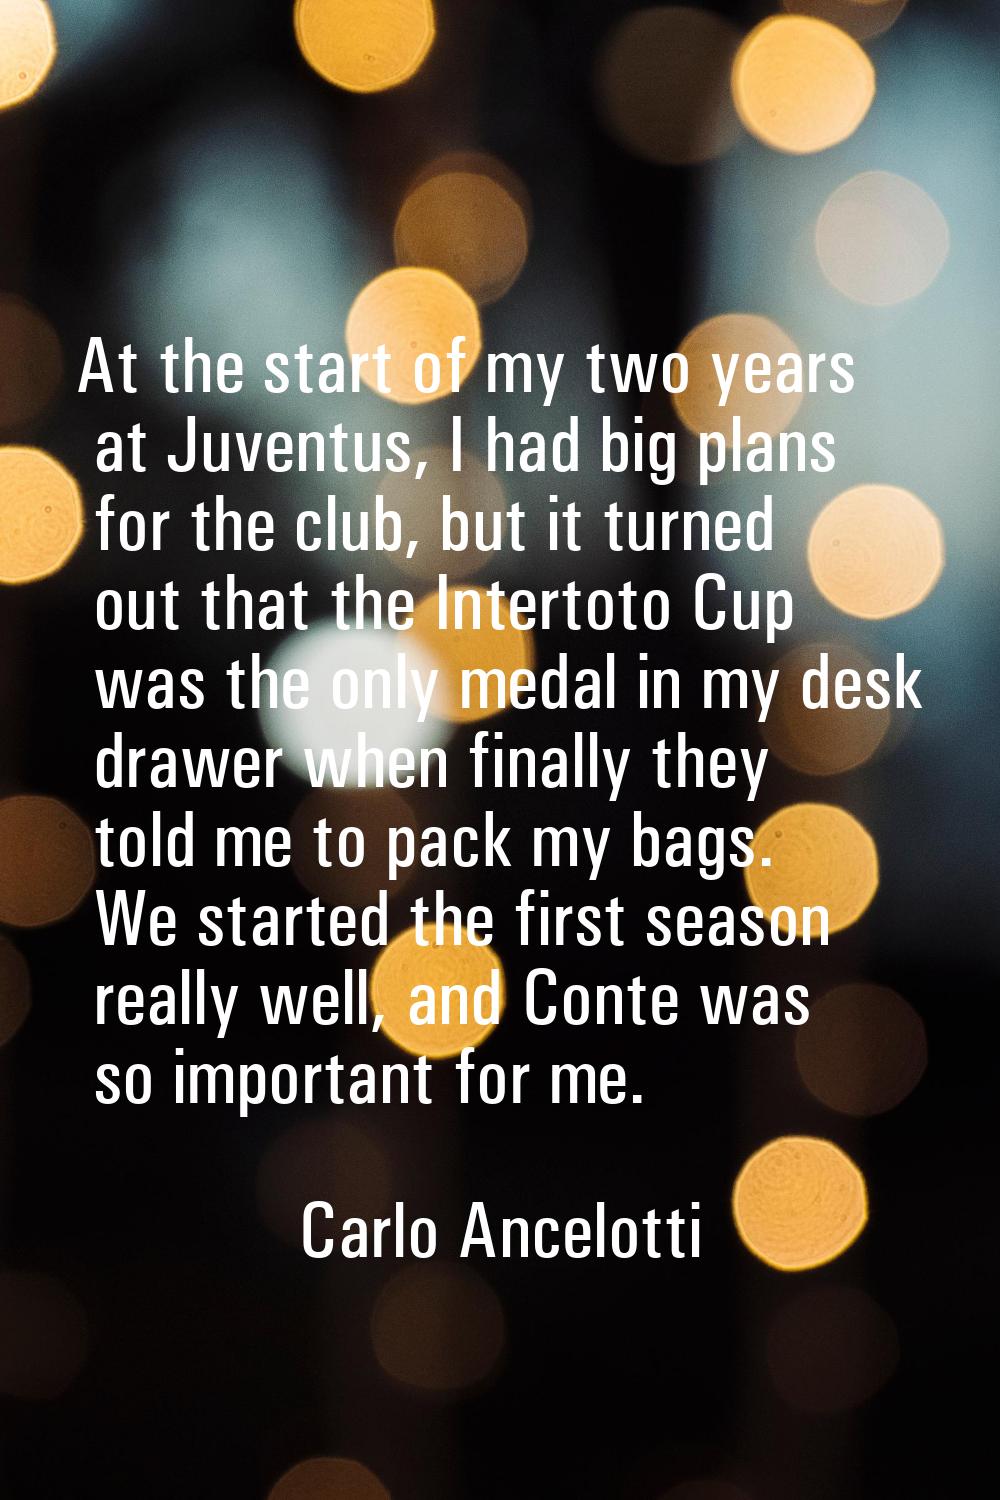 At the start of my two years at Juventus, I had big plans for the club, but it turned out that the 